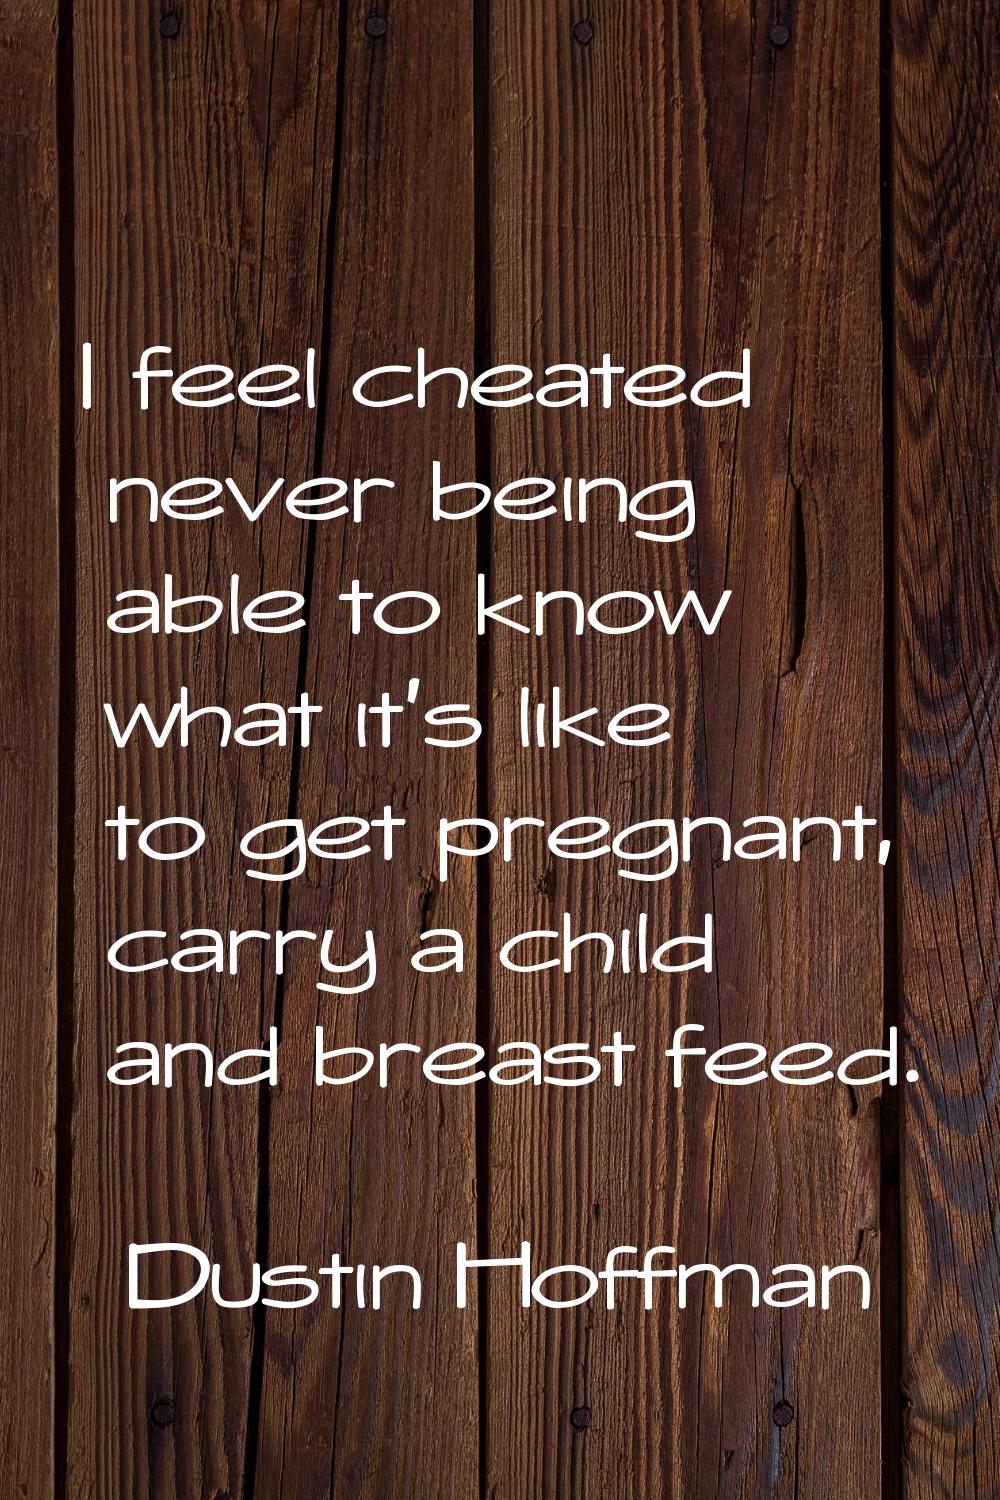 I feel cheated never being able to know what it's like to get pregnant, carry a child and breast fe